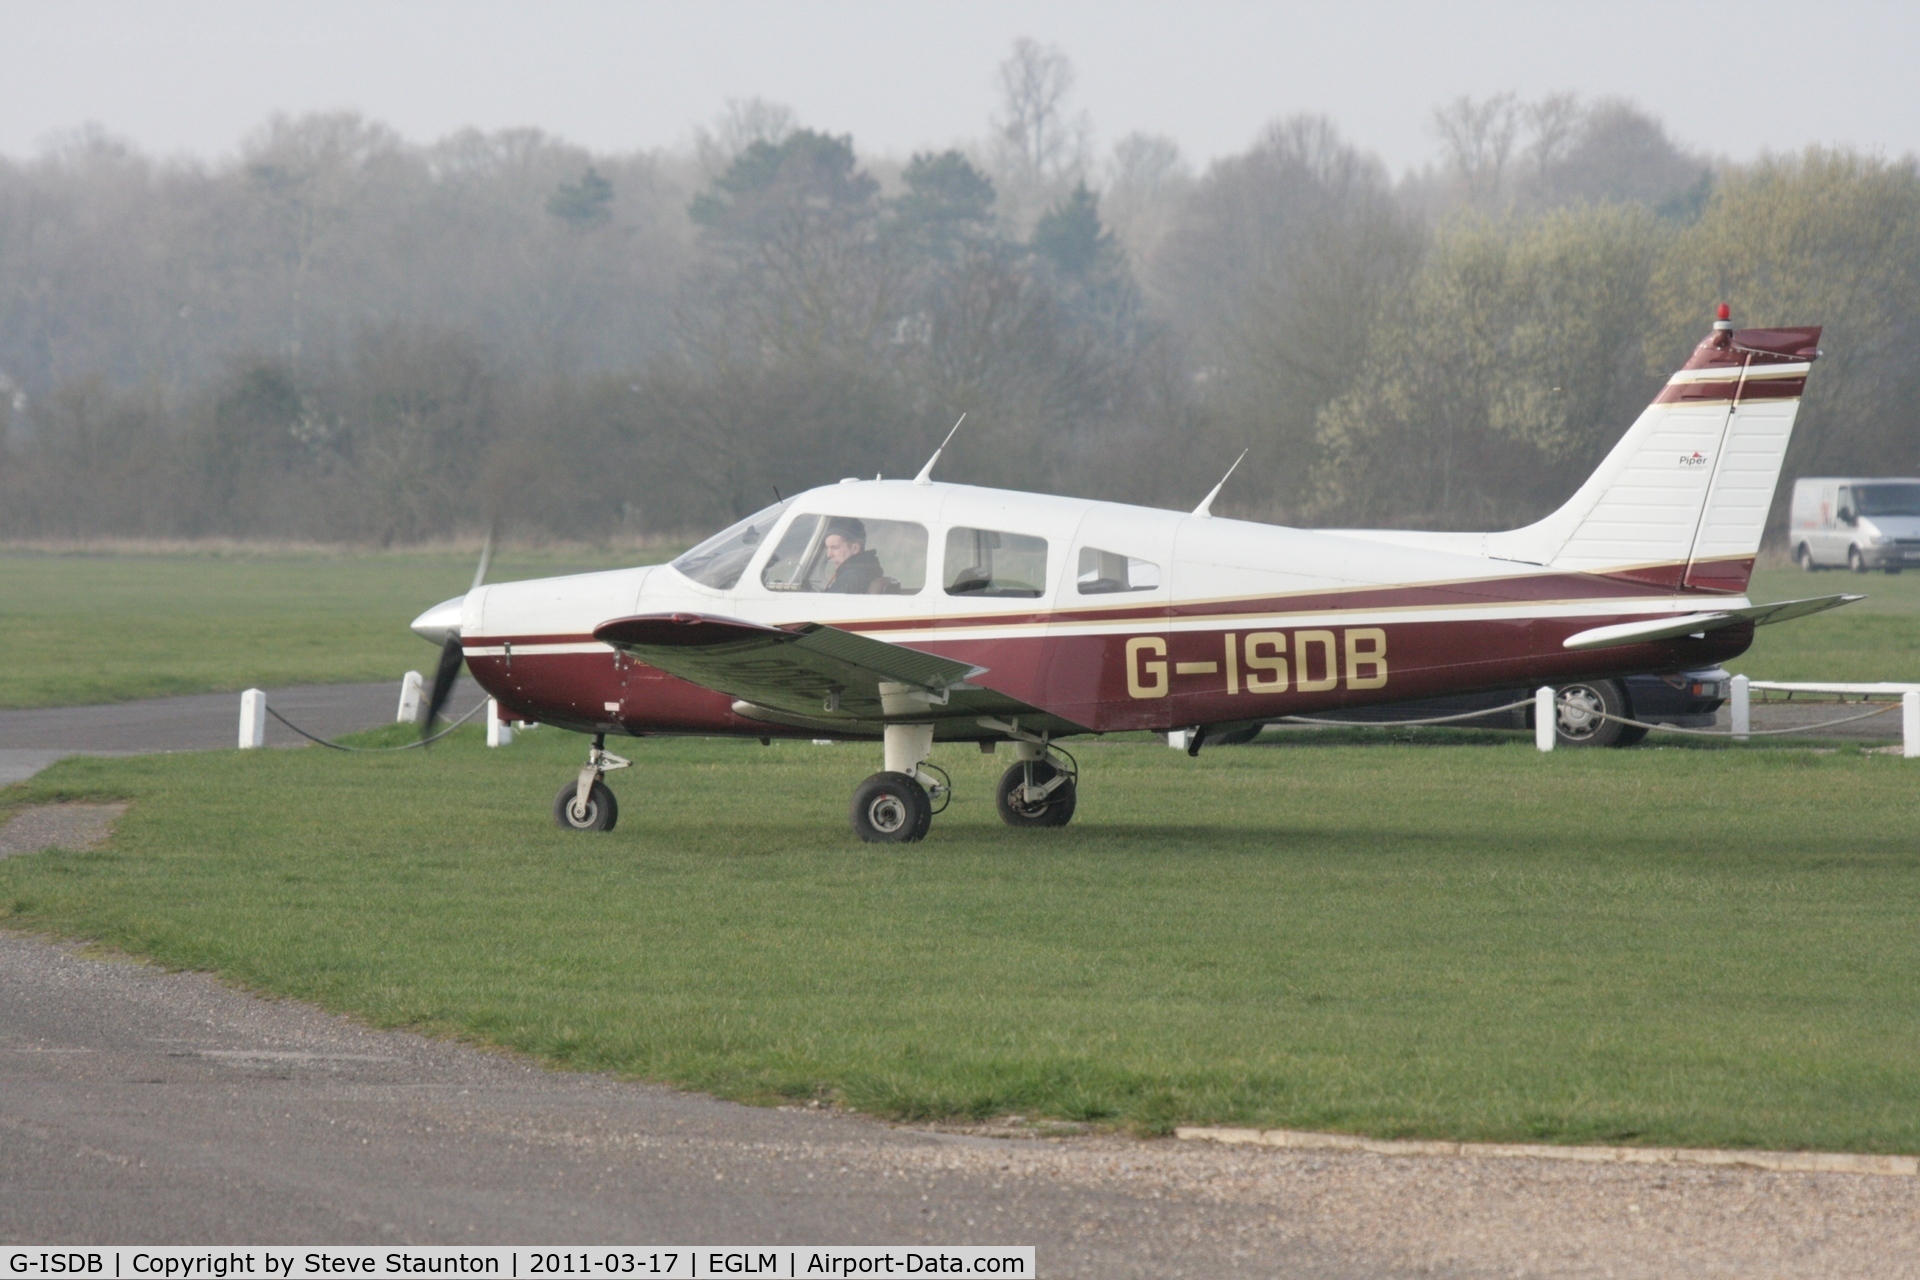 G-ISDB, 1977 Piper PA-28-161 Warrior II C/N 28-7716074, Taken at White Waltham Airfield March 2011